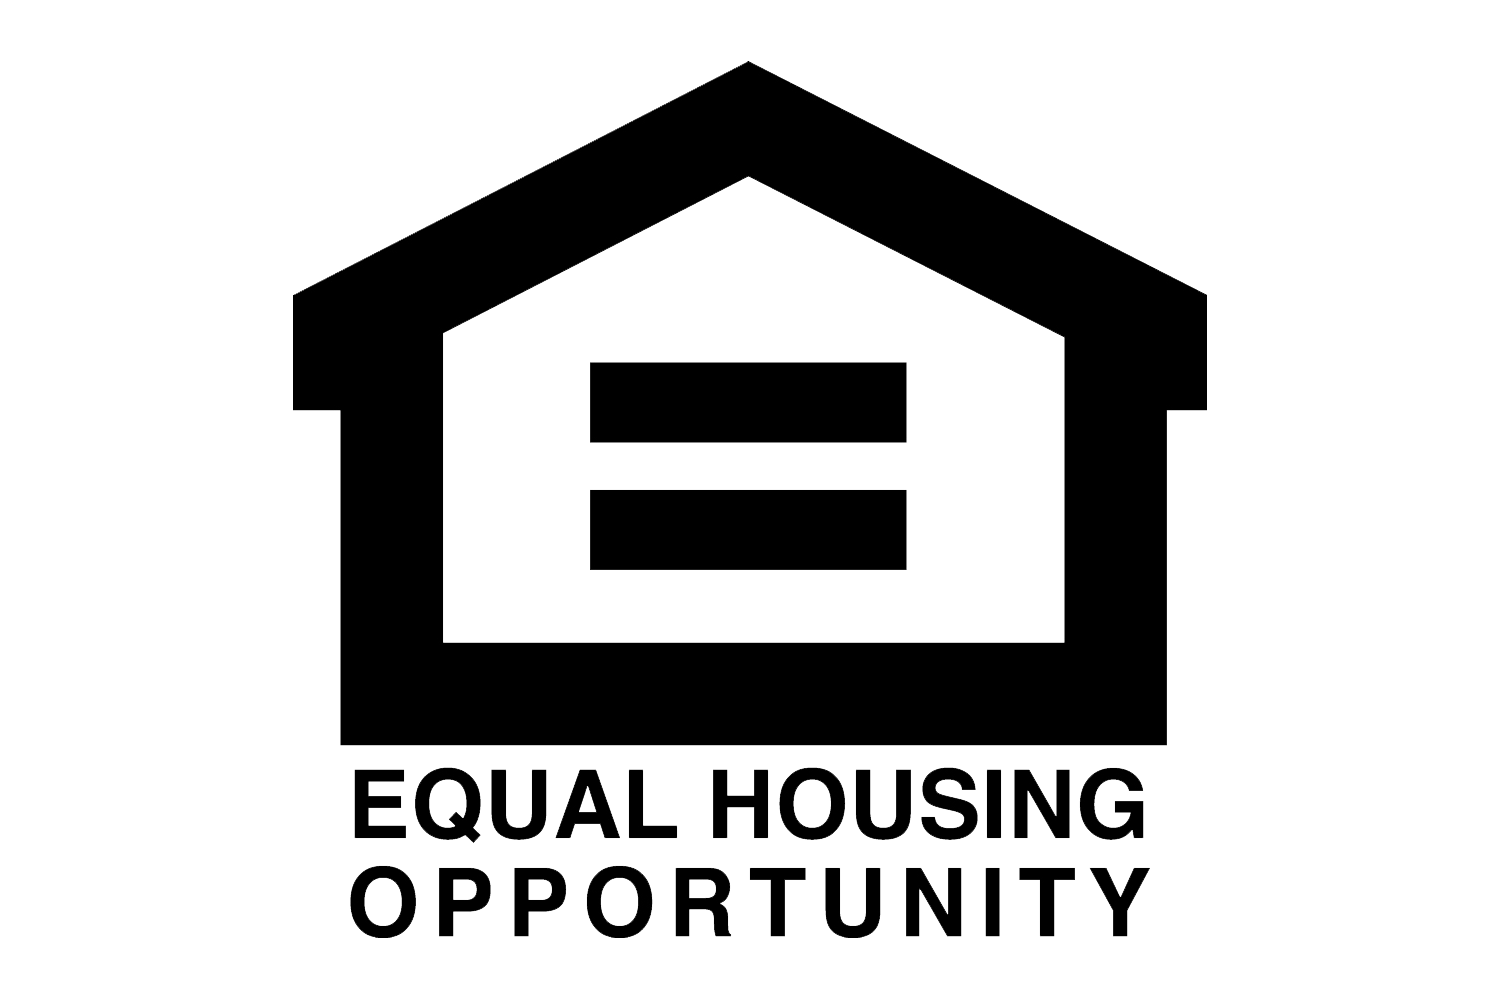 Fair Housing Logo - Equal Housing Logo, Equal Housing Symbol, Meaning, History and Evolution